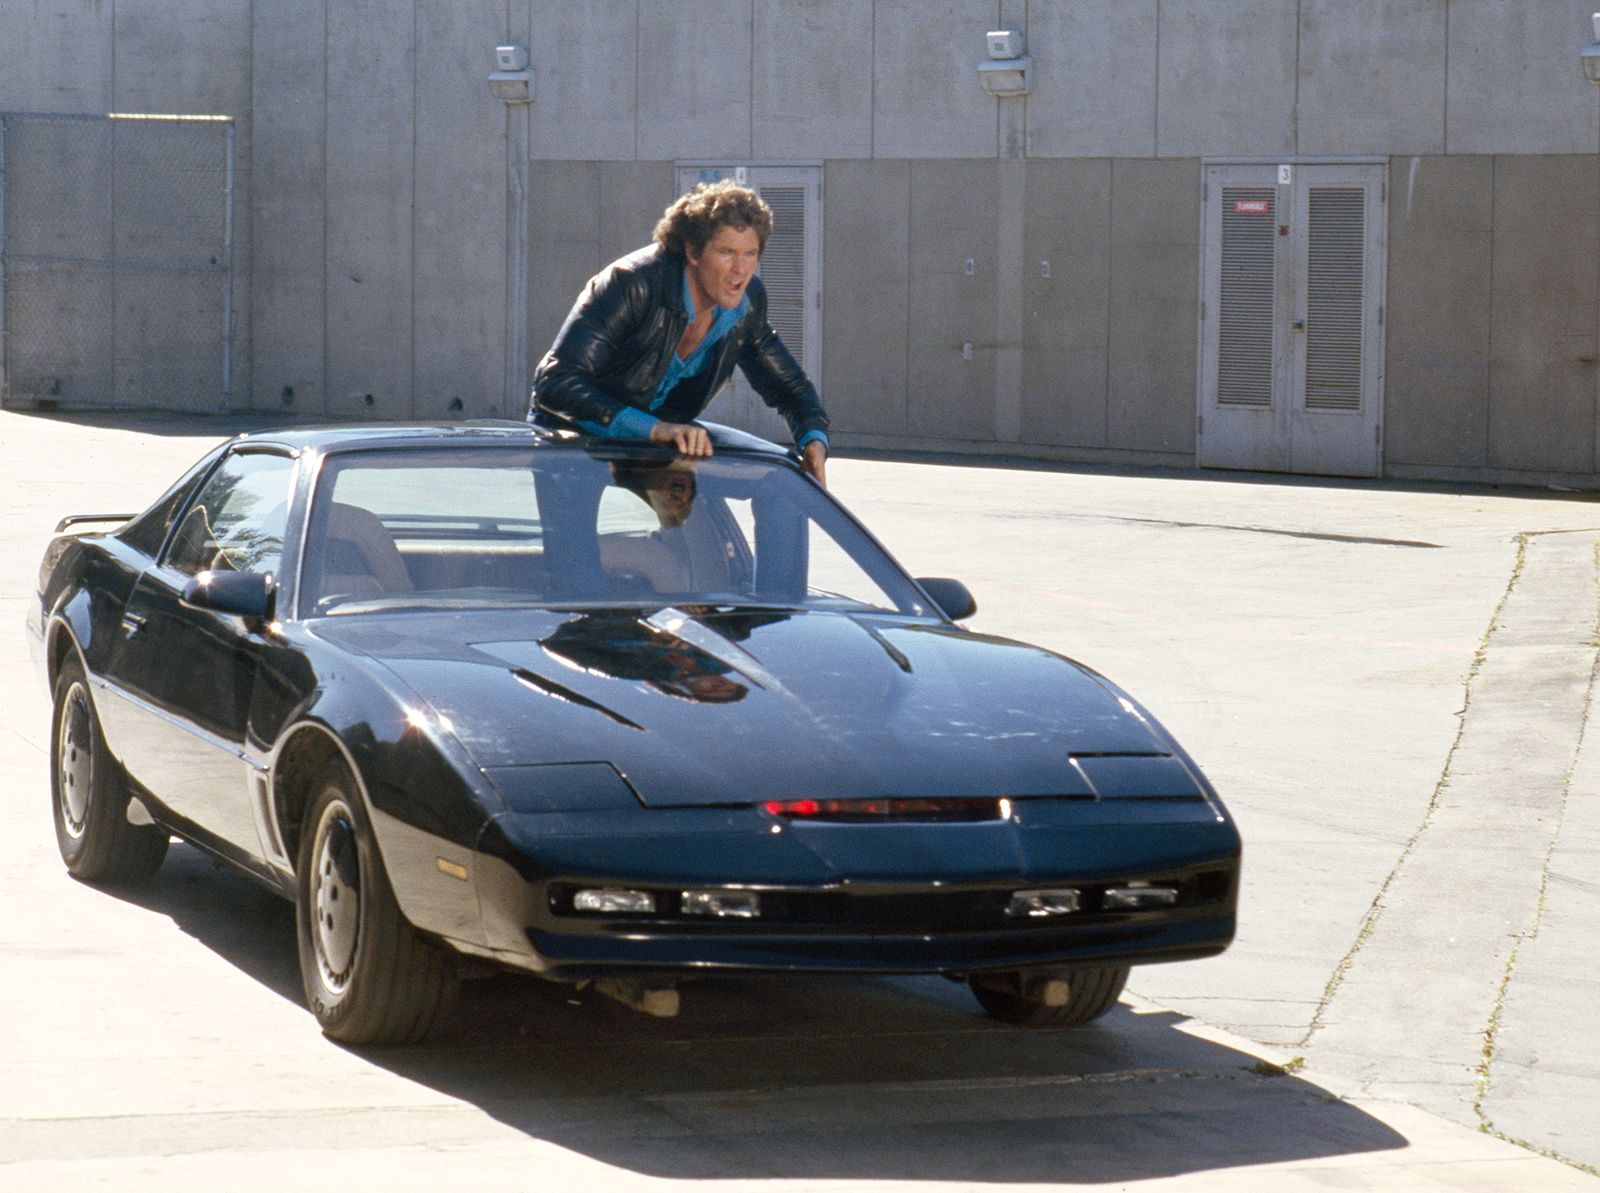 David Hasselhoff is auctioning off his personal K.I.T.T. car from